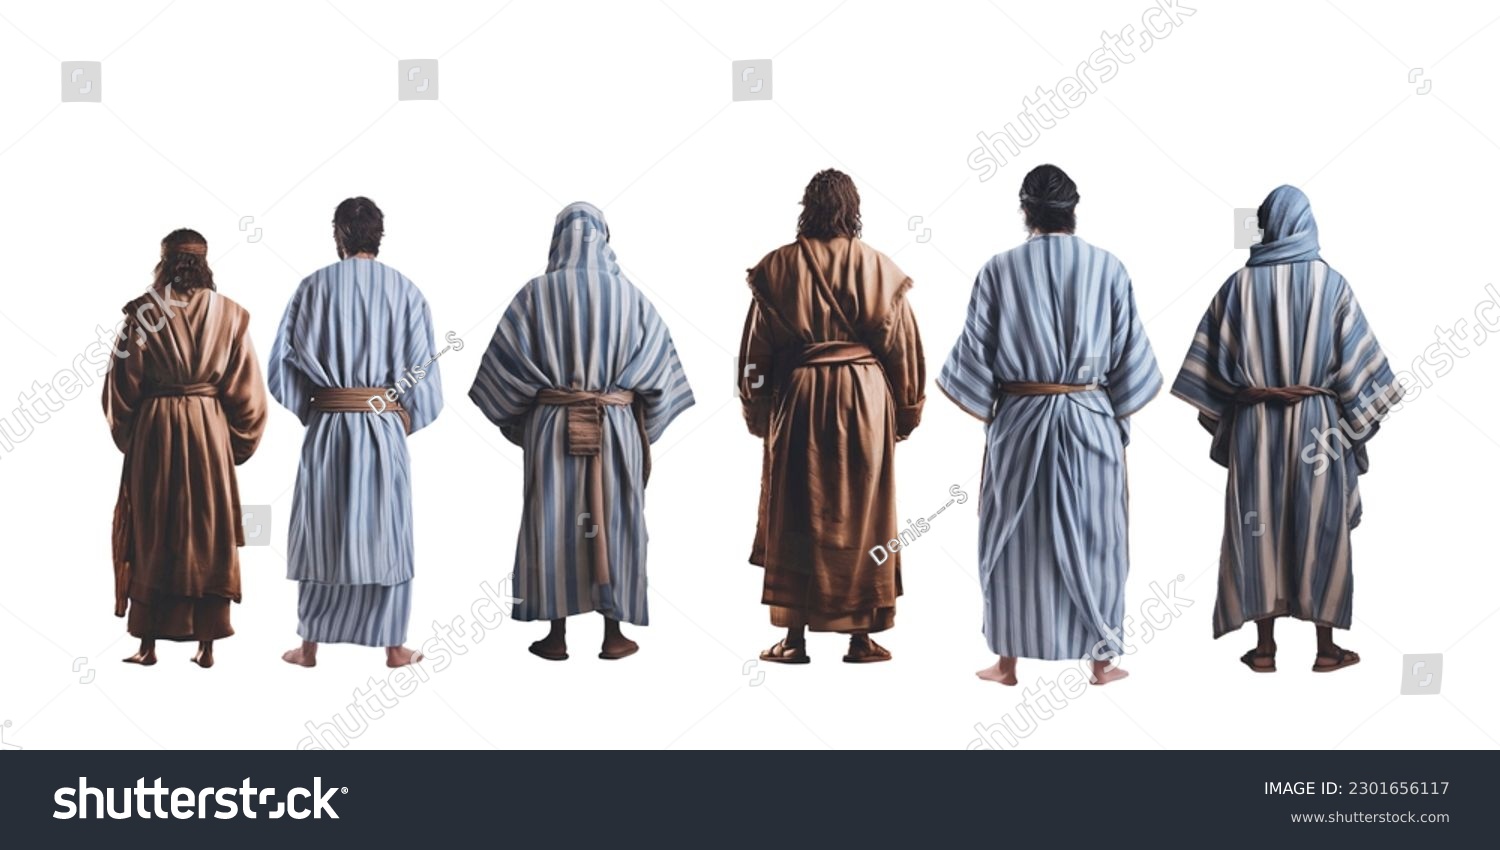 Apostles of Jesus Christ middle eastern men wearing colorful medieval clothing standing view from the back #2301656117